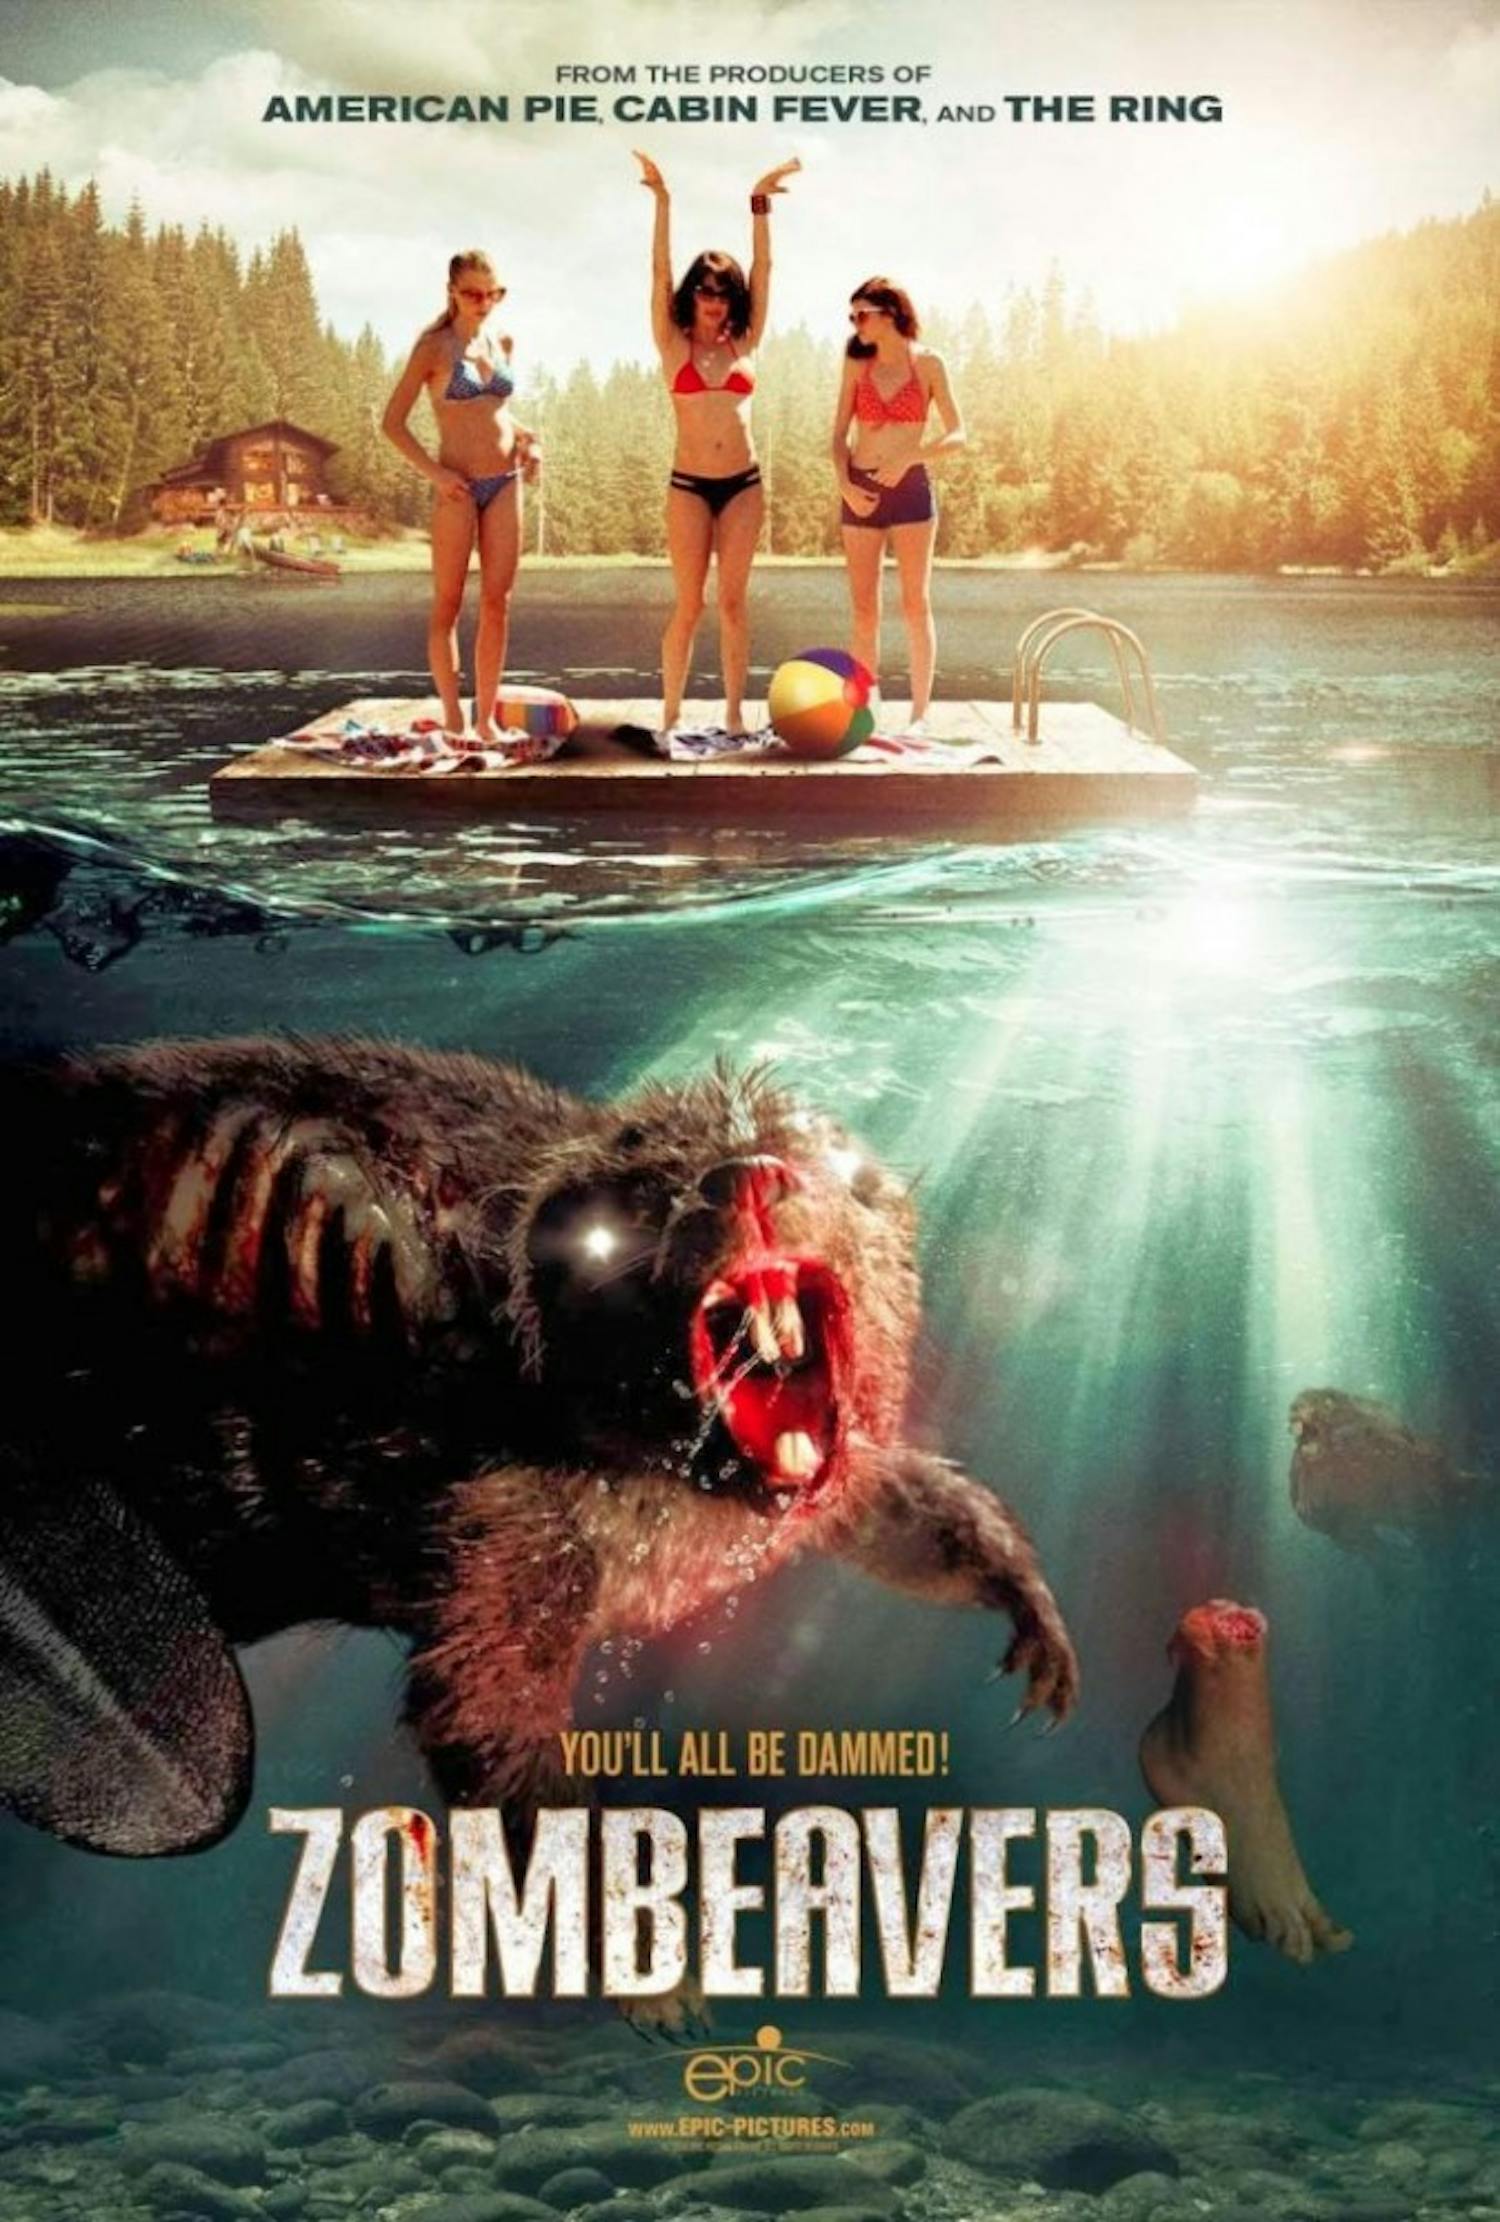 Zombeavers is a movie about a&nbsp;classic college mountain trip gone wrong.